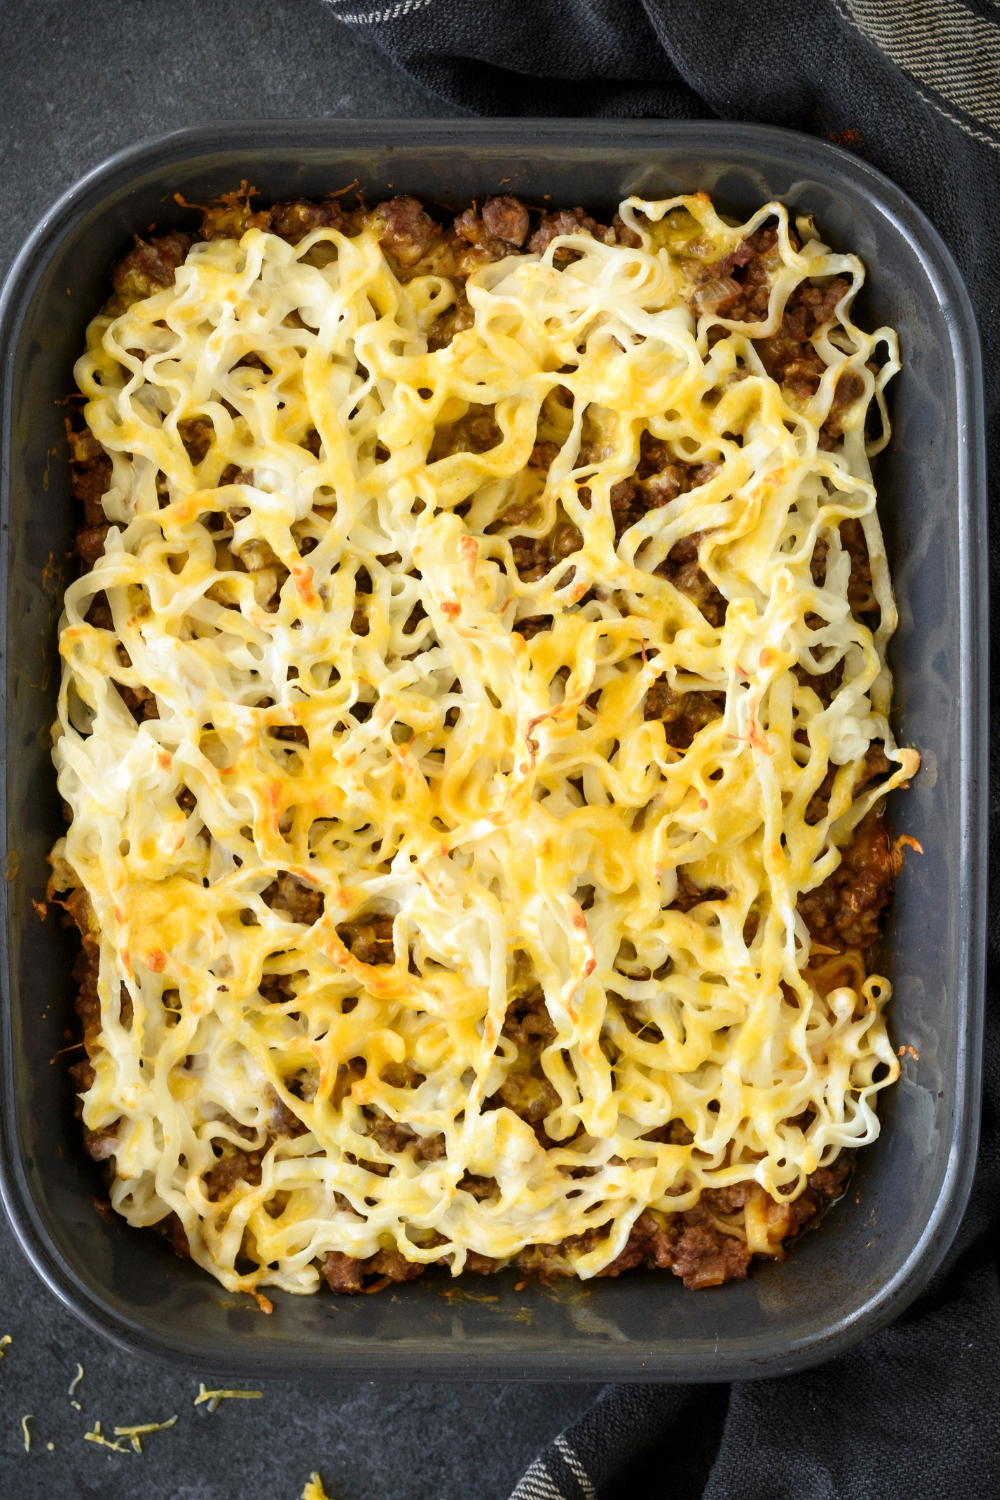 A baking dish filled with freshly baked hamburger and noodle casserole, covered with shredded cheese.